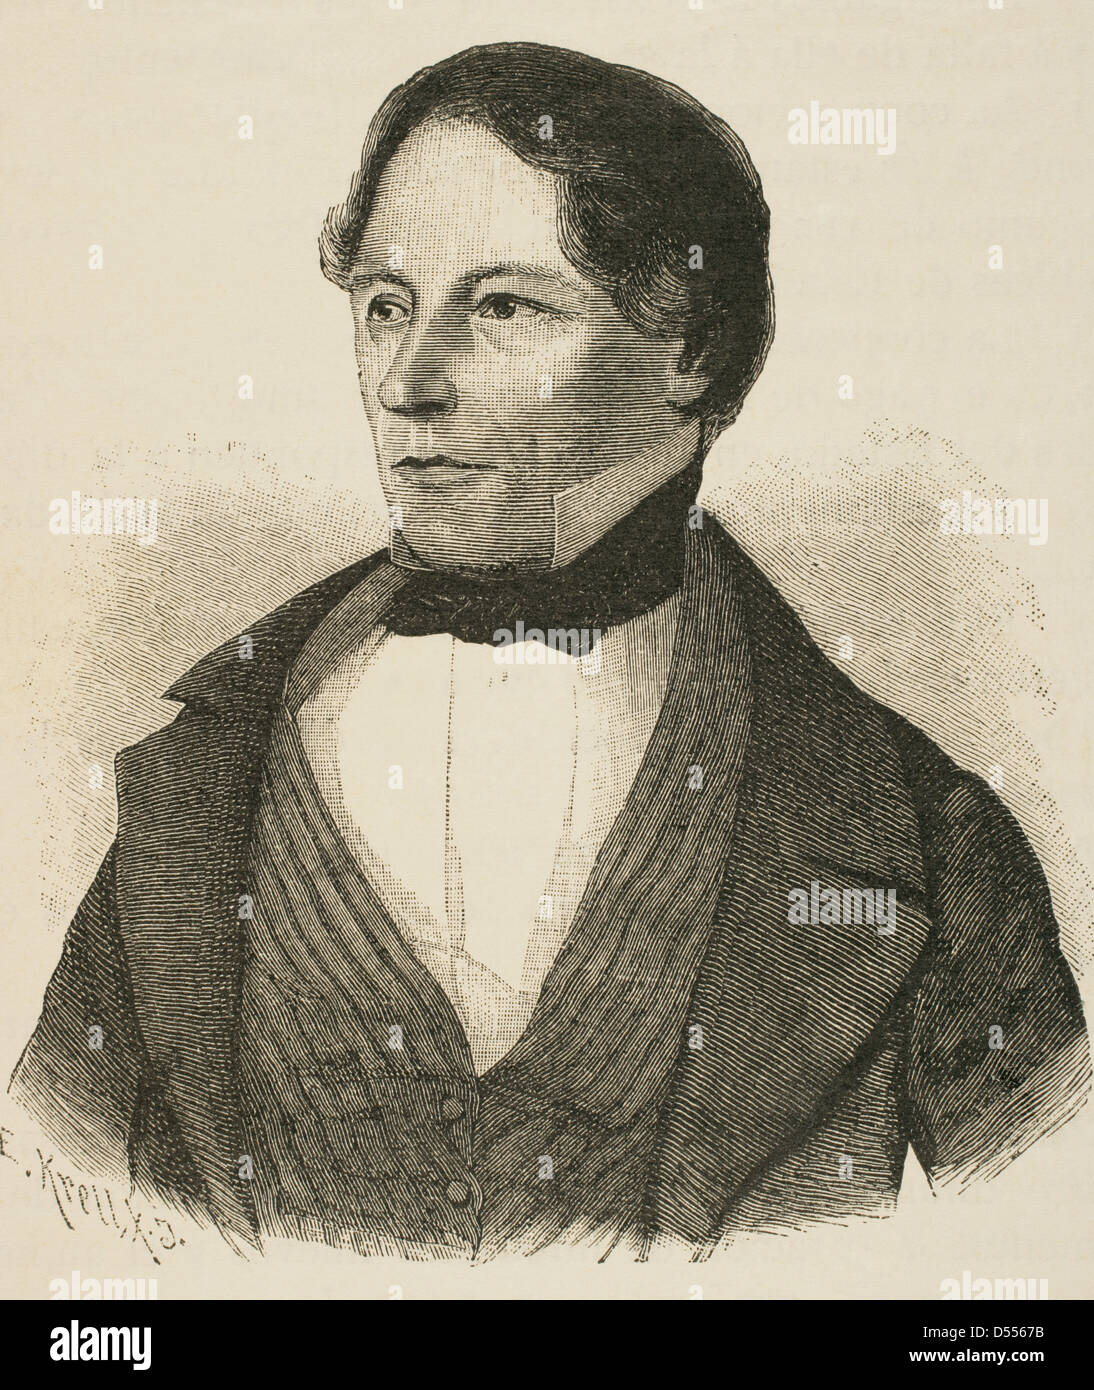 David Hansemann (1790-1864). Prussian politician and banker. Engraving in Universal History, 1885. Stock Photo